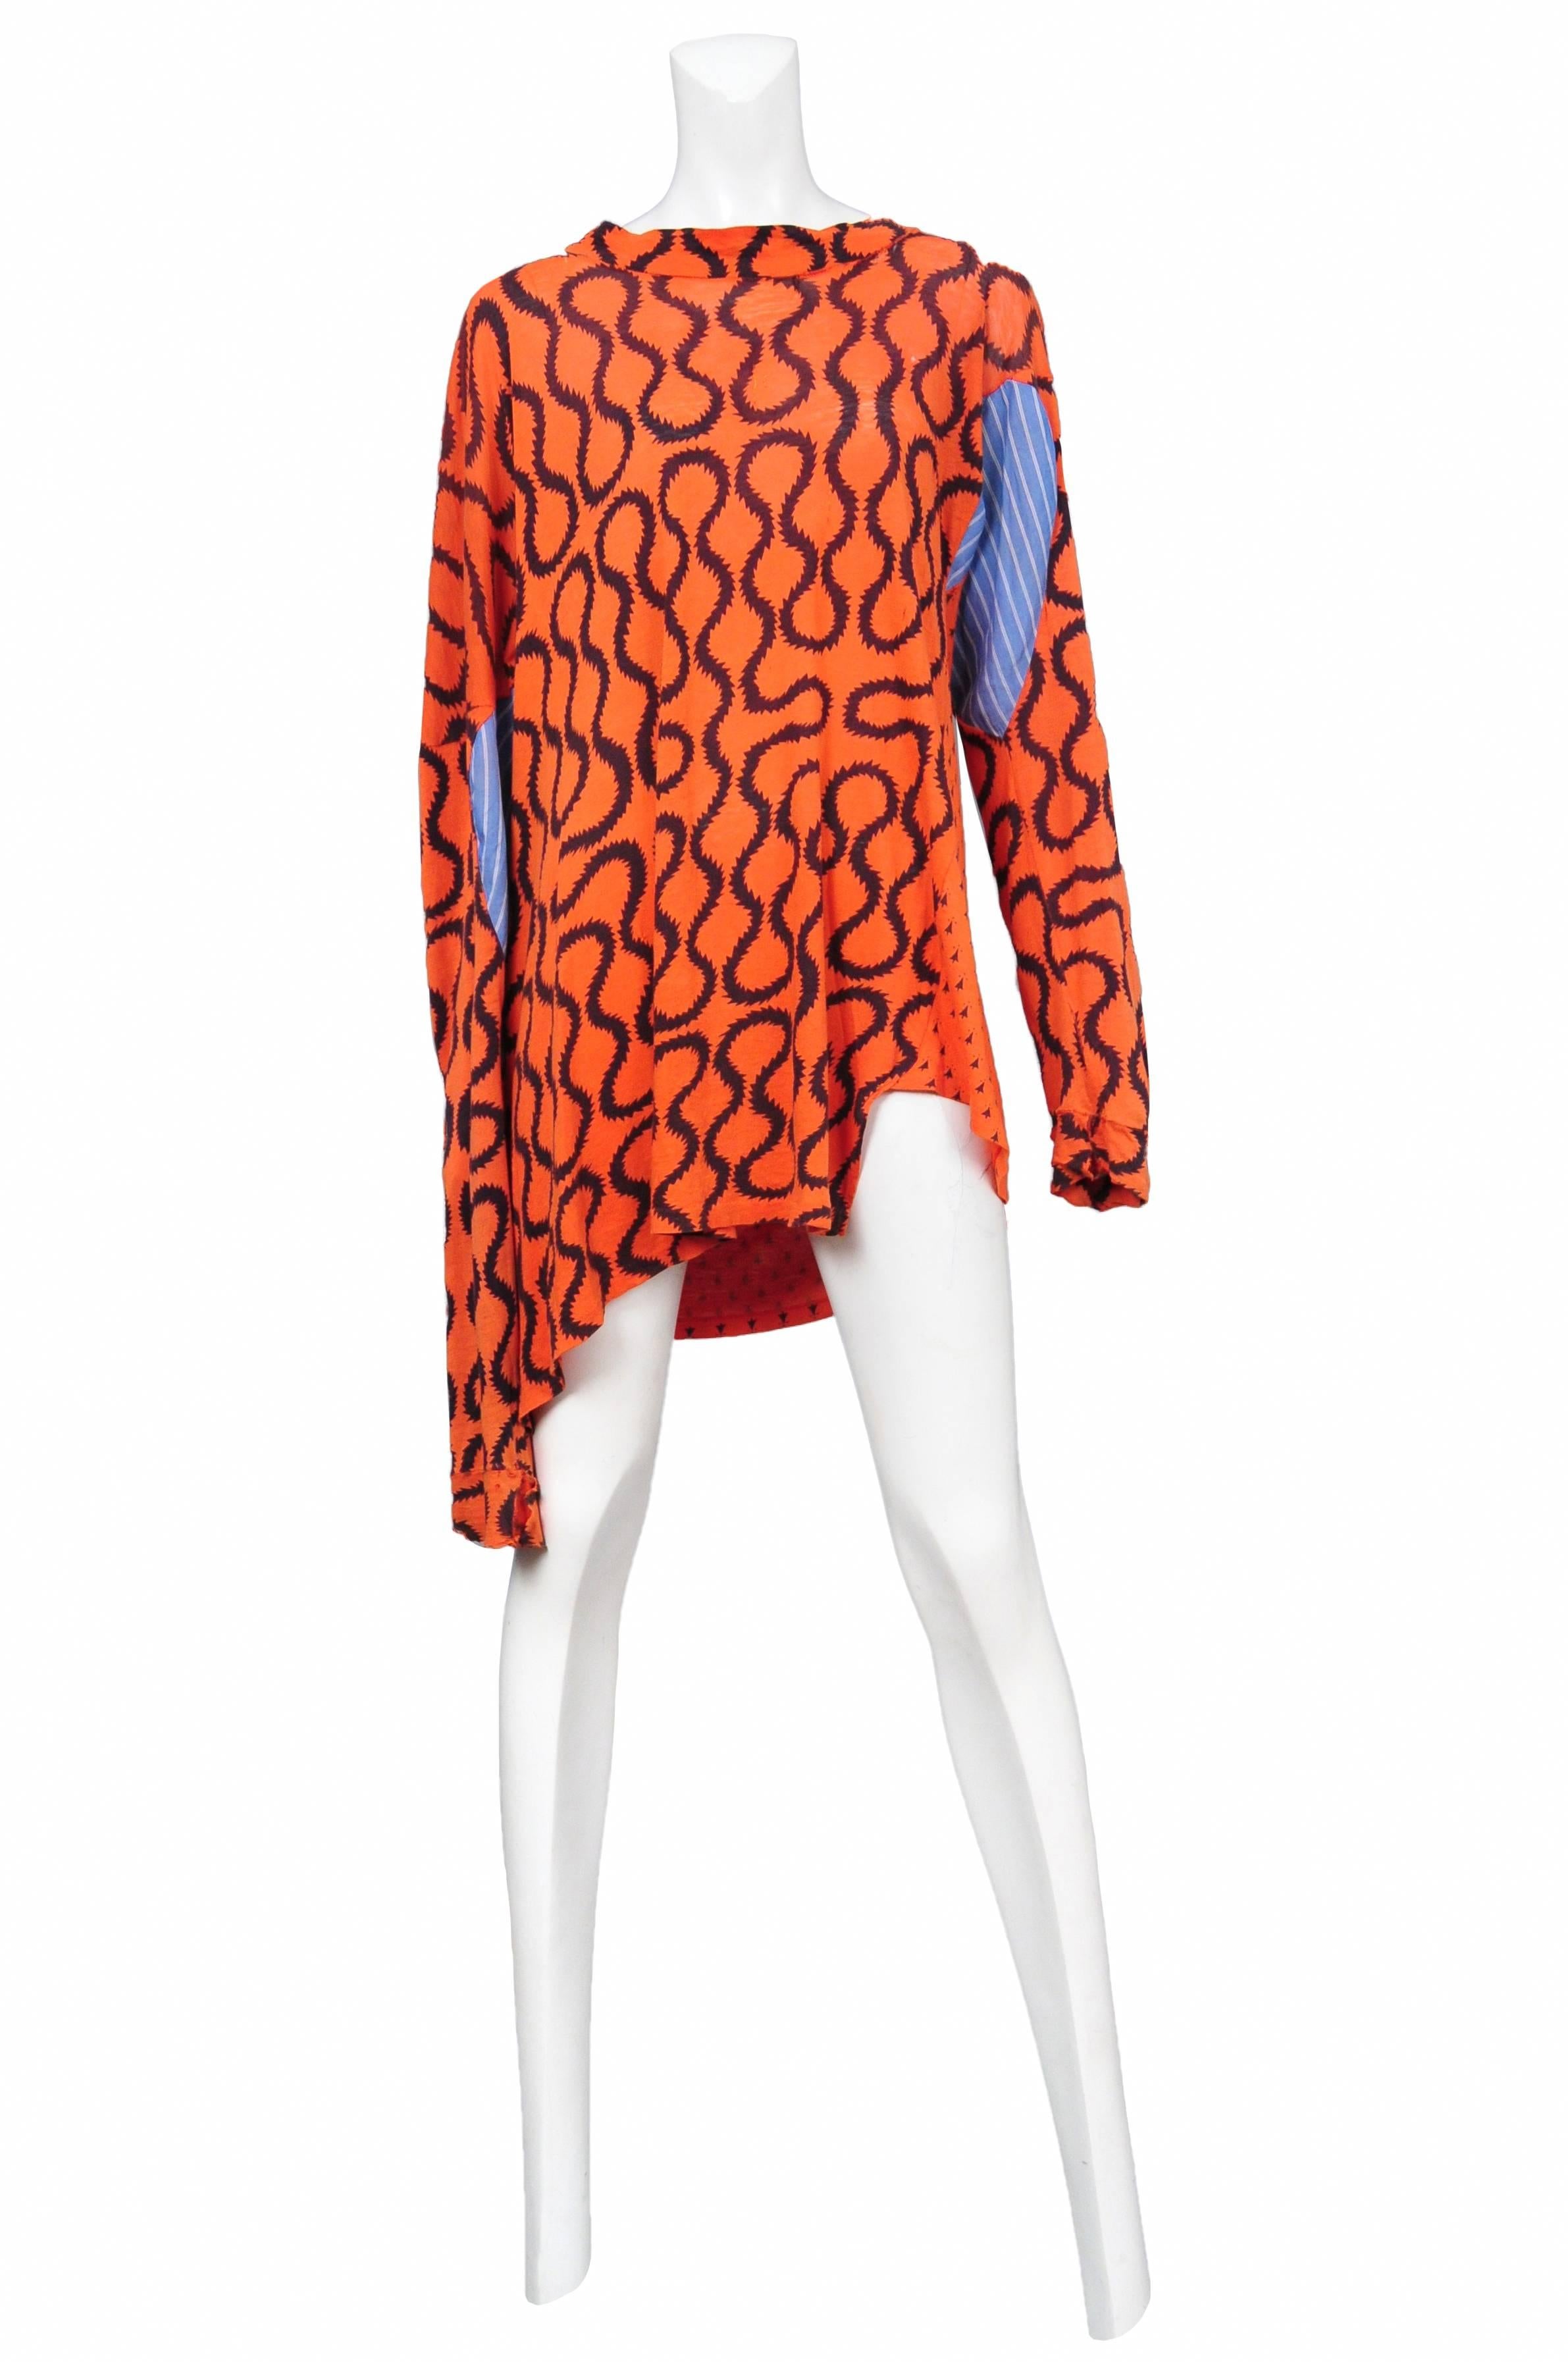 Westwood and McClaren Worlds End bright orange squiggle print pirate top with mens shirting inset. Circa 1981